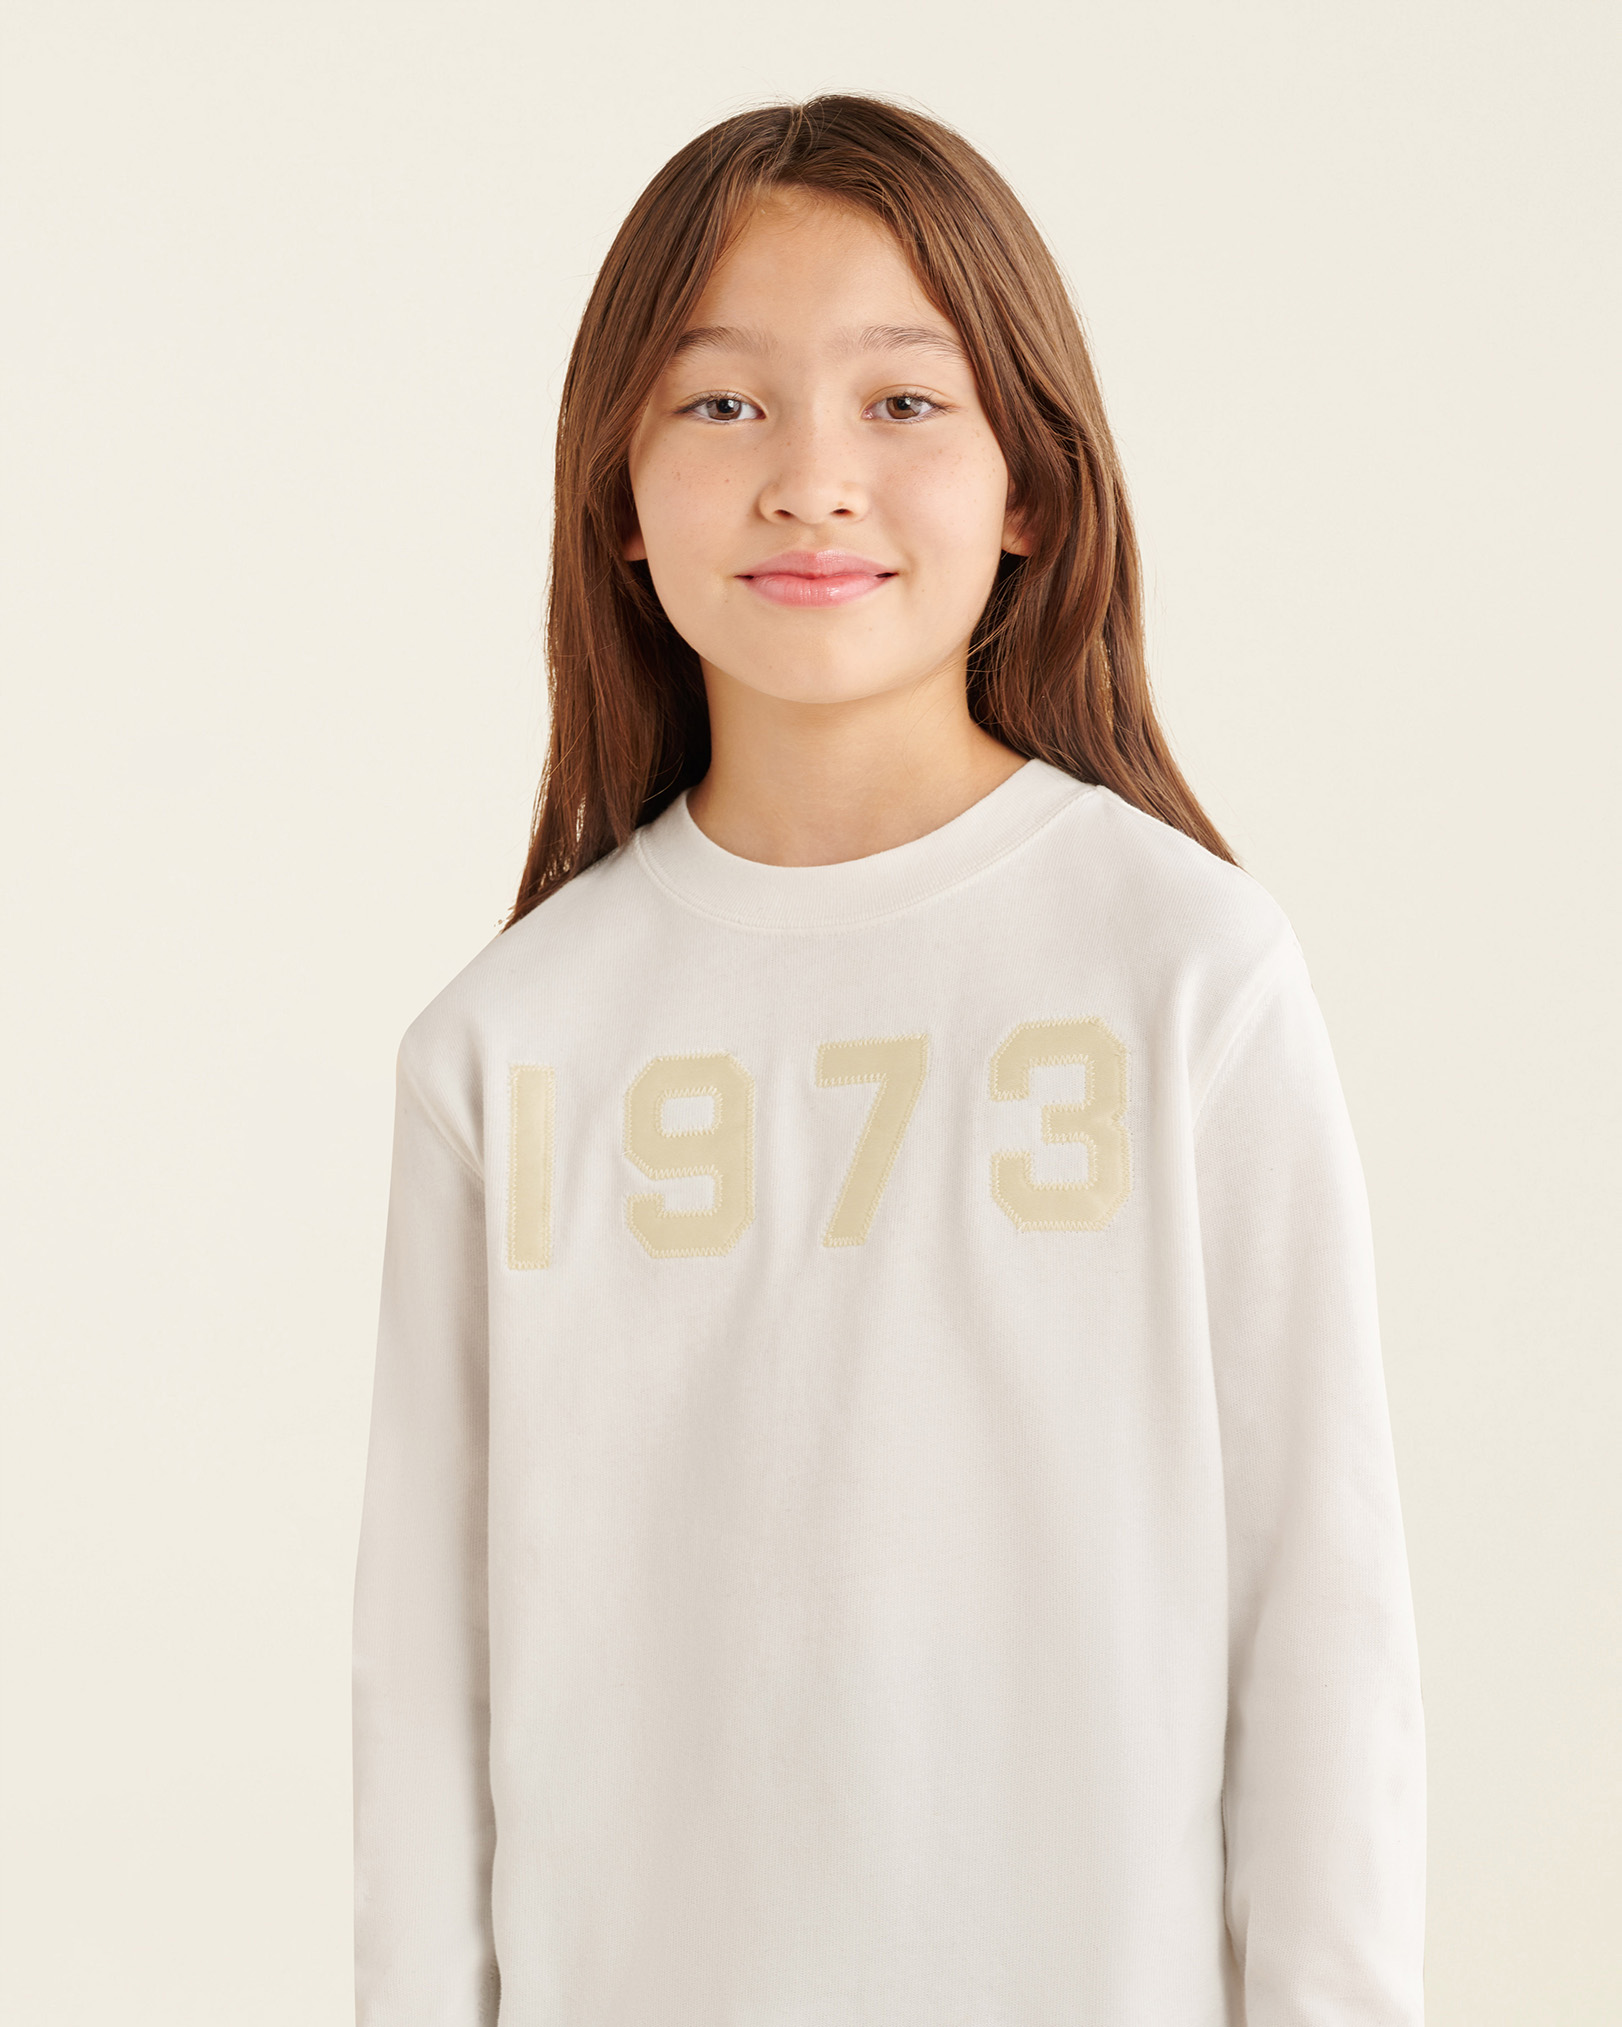 Roots Kids One 1973 T-Shirt in Coconut Milk